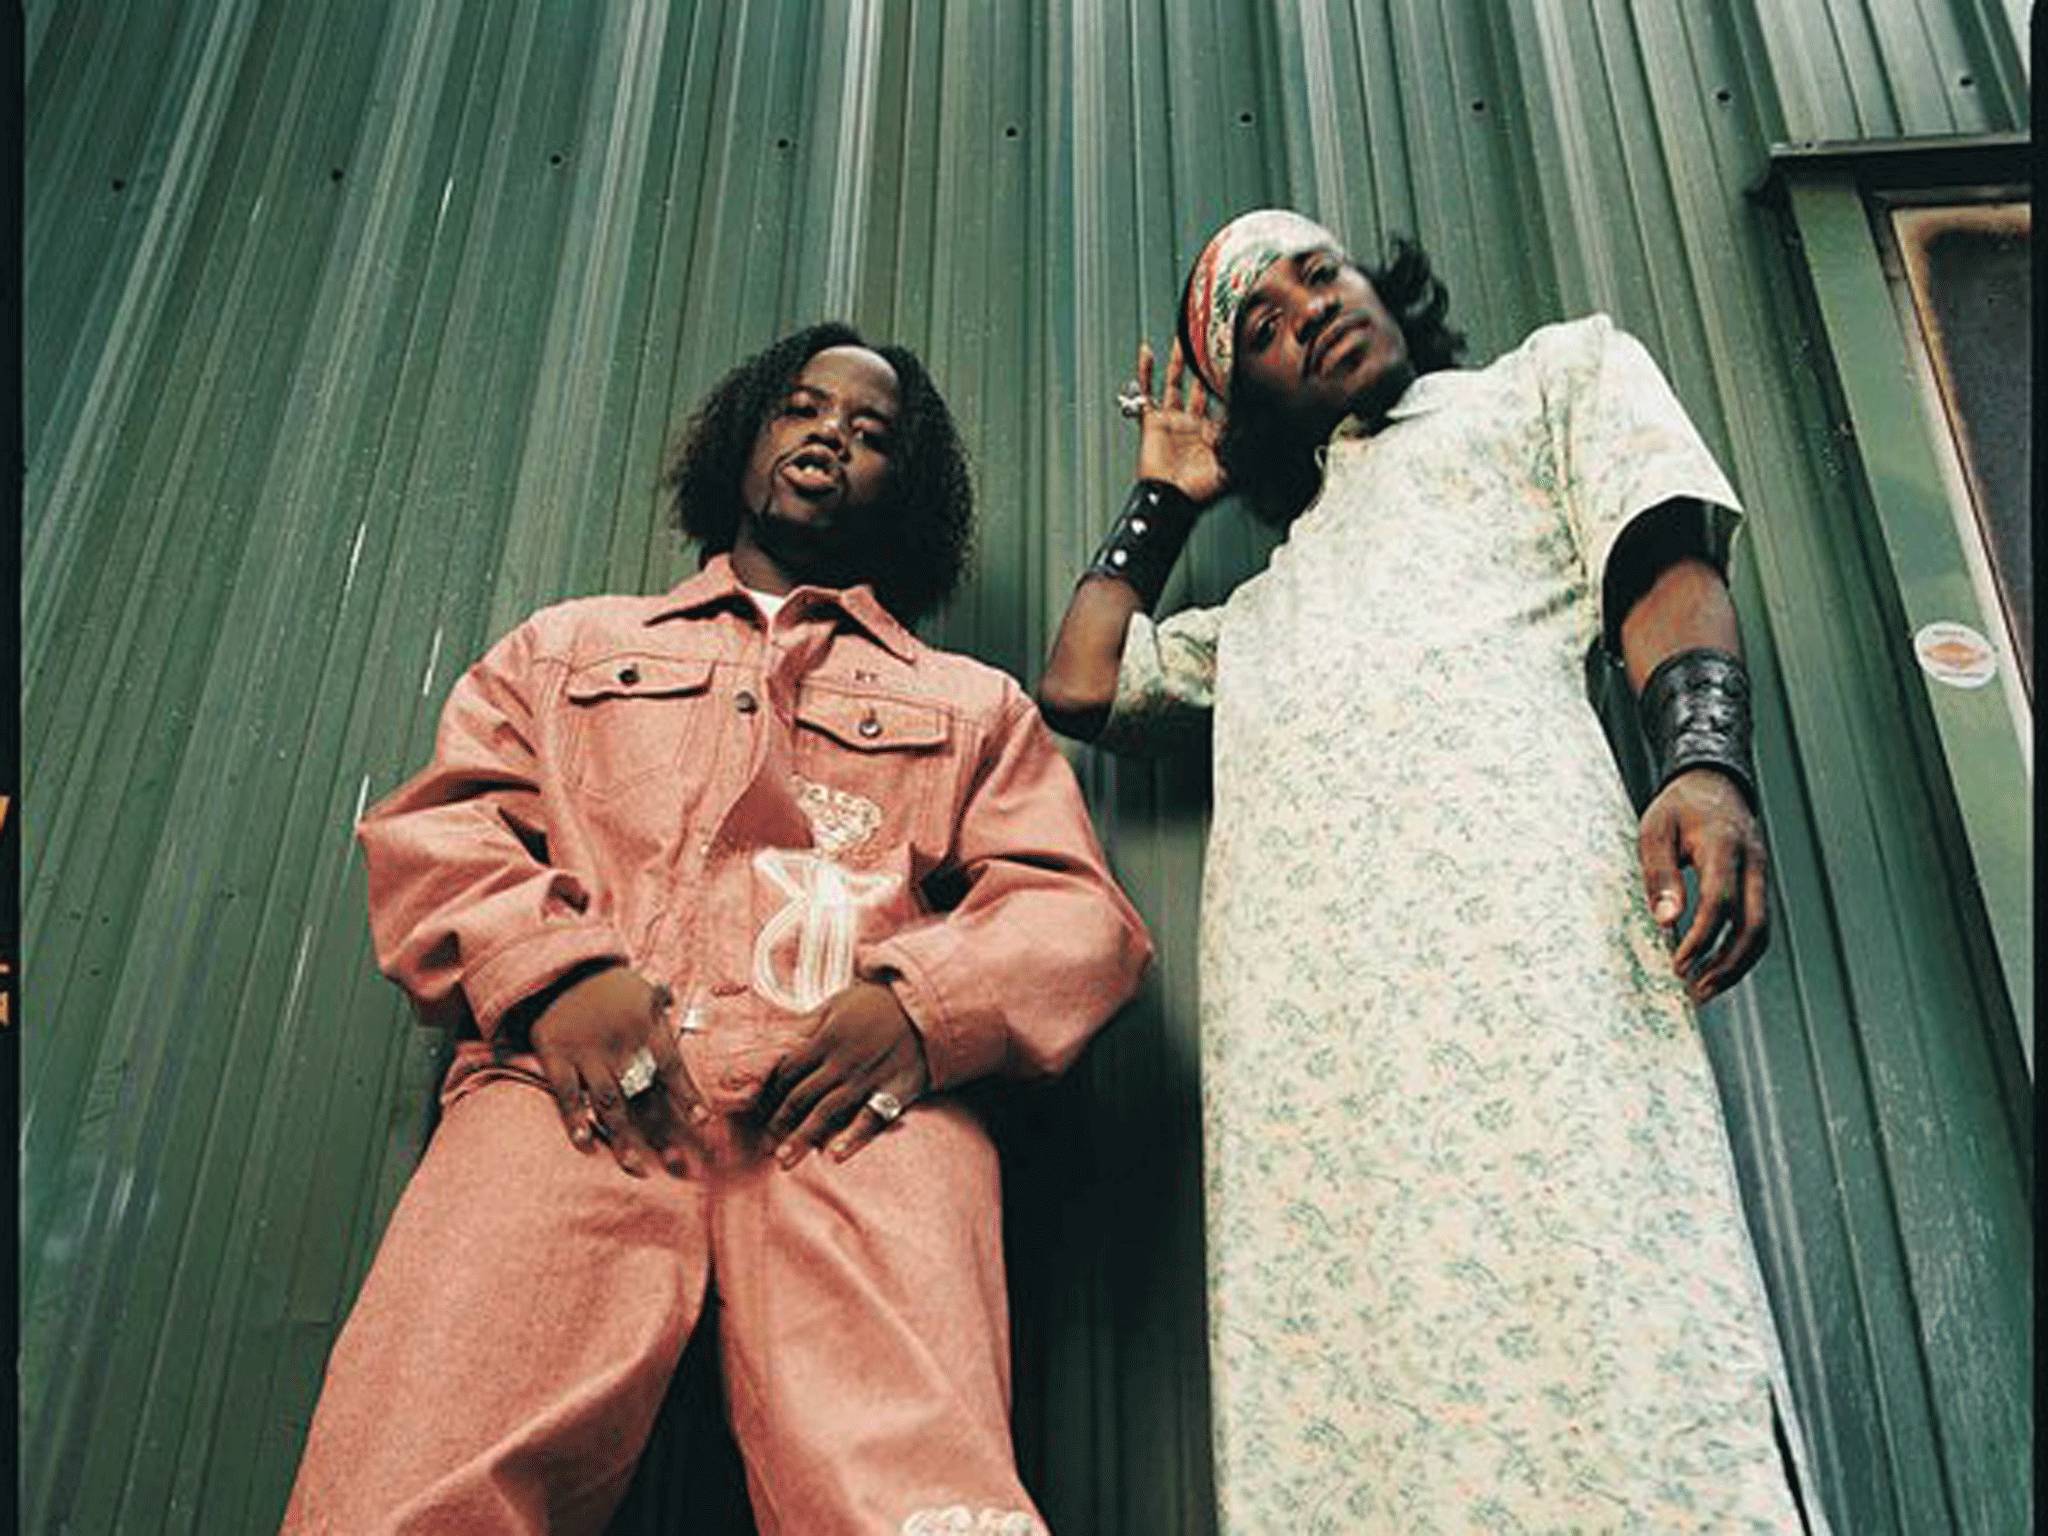 Outkast performed a series of comeback shows in the summer of 2014